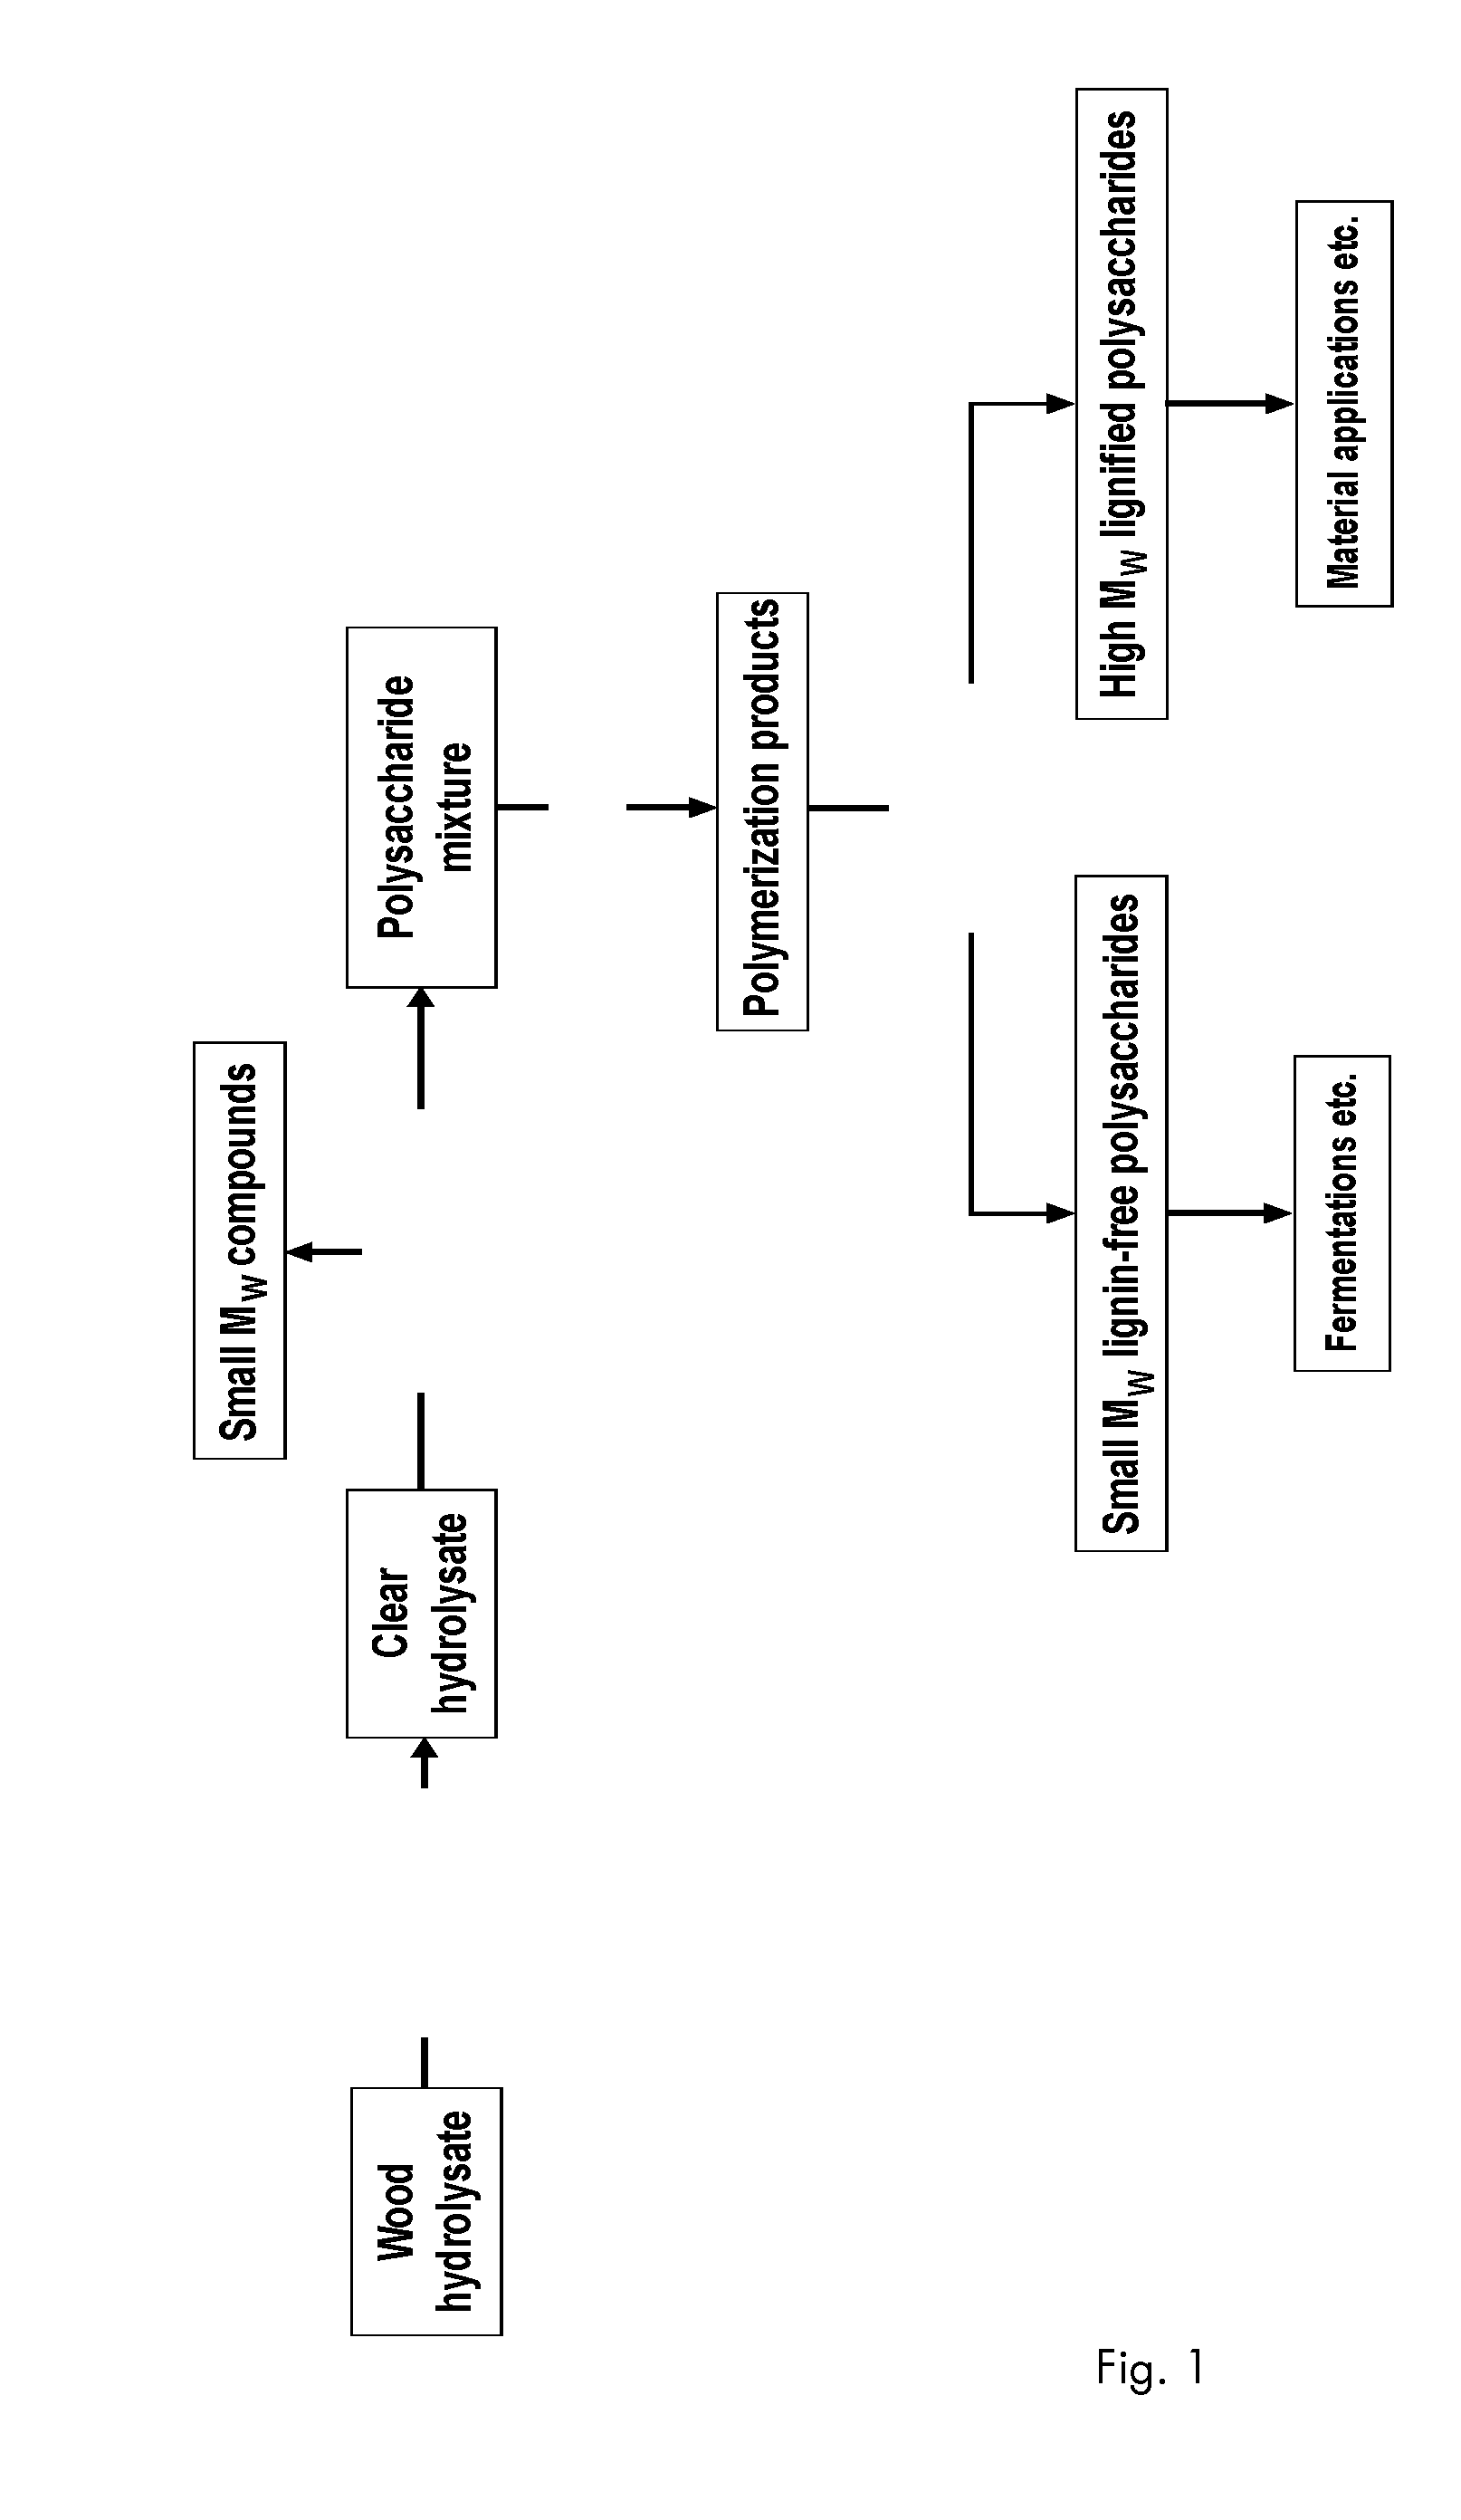 Method to increase the molecular weight of wood mannans and xylans comprising aromatic moieties